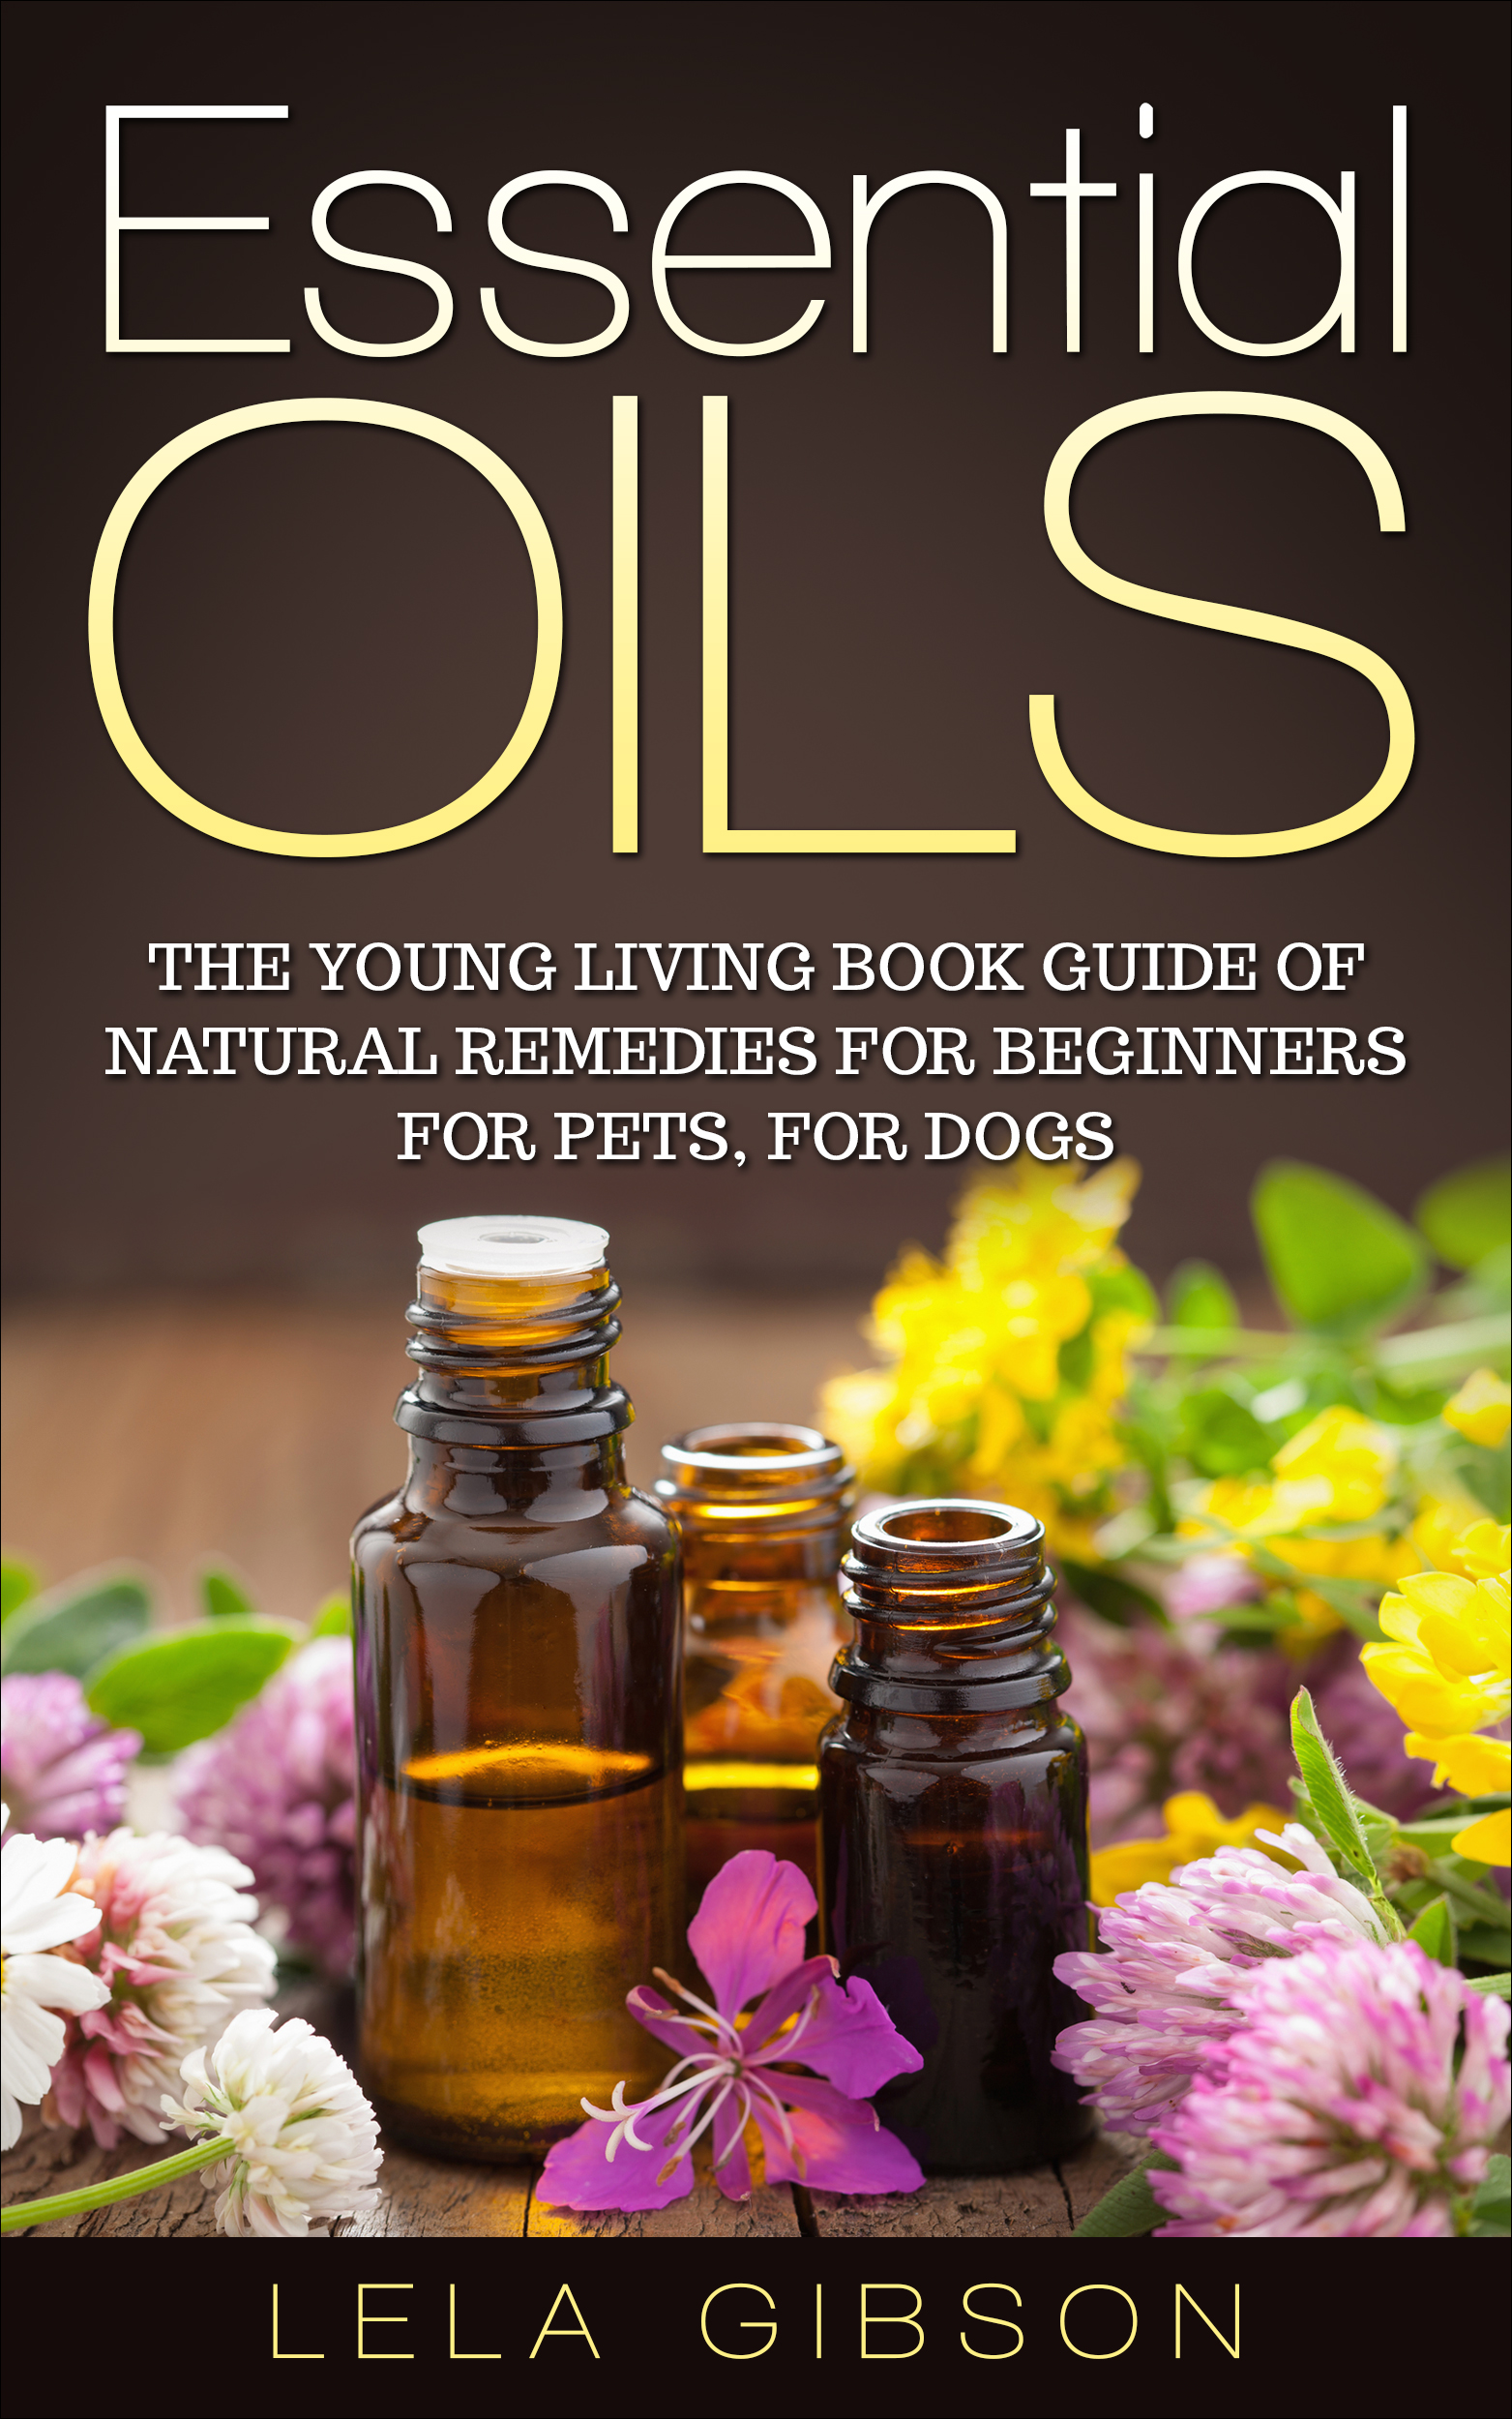 FREE: Essential Oils: The Young Living Book Guide of Natural Remedies for Beginners for Pets, For Dogs by Lela Gibson